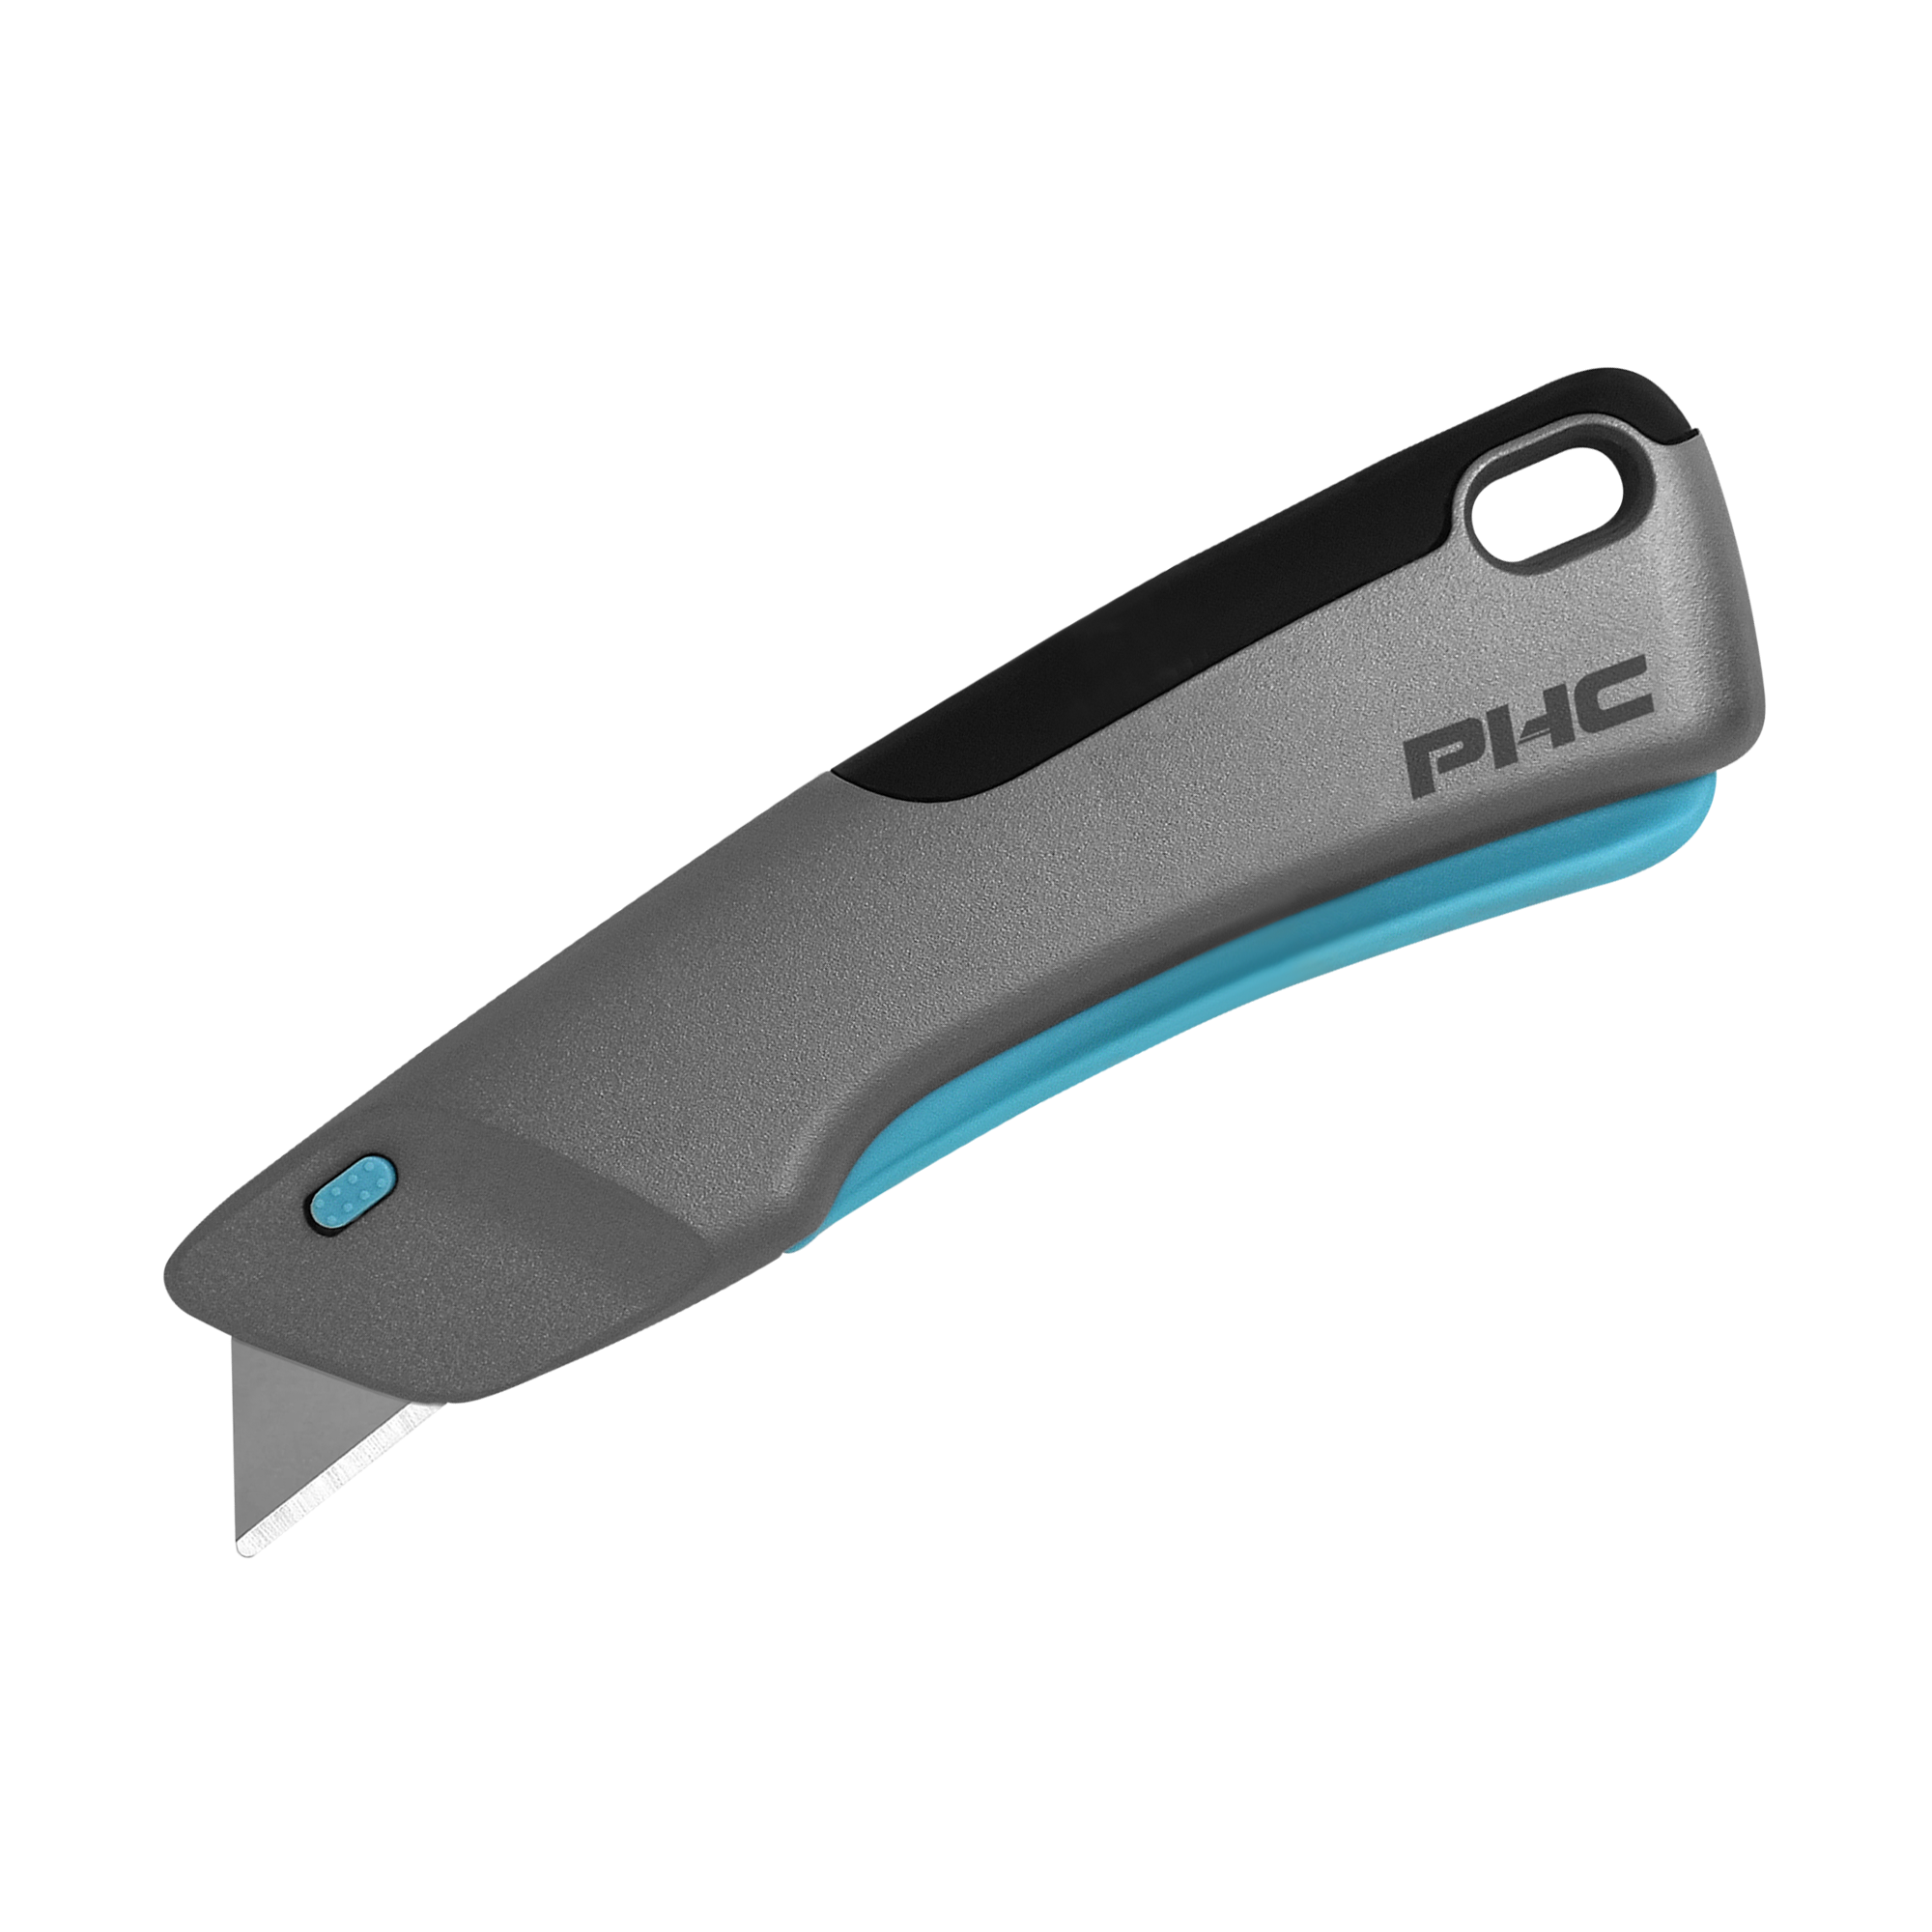 https://phcsafety.com/wp-content/uploads/e13302-9-pacific-handy-cutter-victa-smart-retract-front-angle-30-blade-extended.png